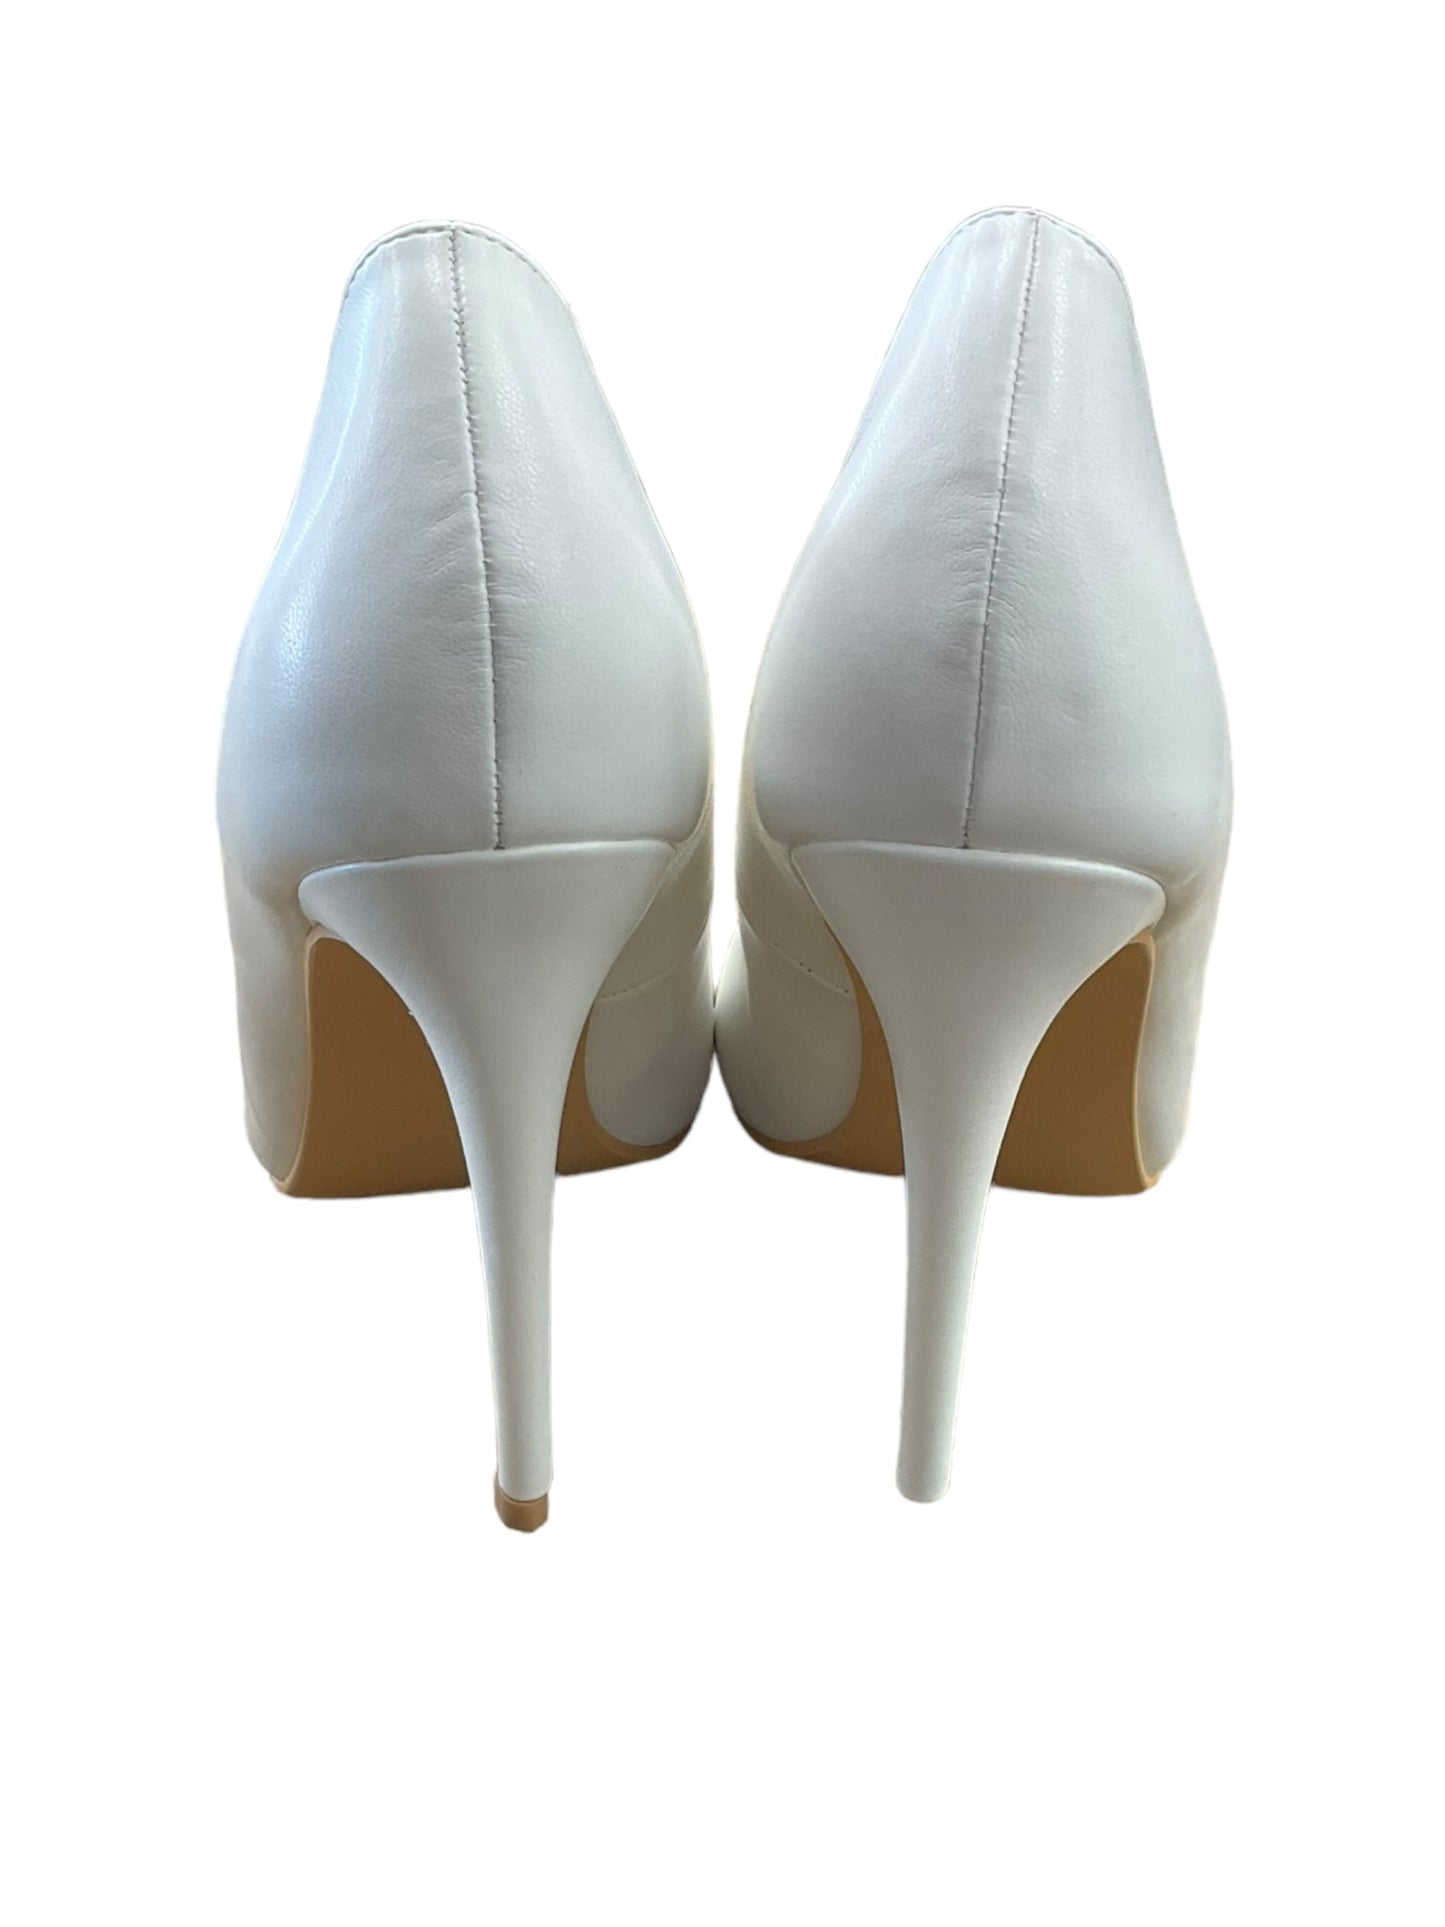 White Shoes Heels Stiletto Clothes Mentor, Size 9